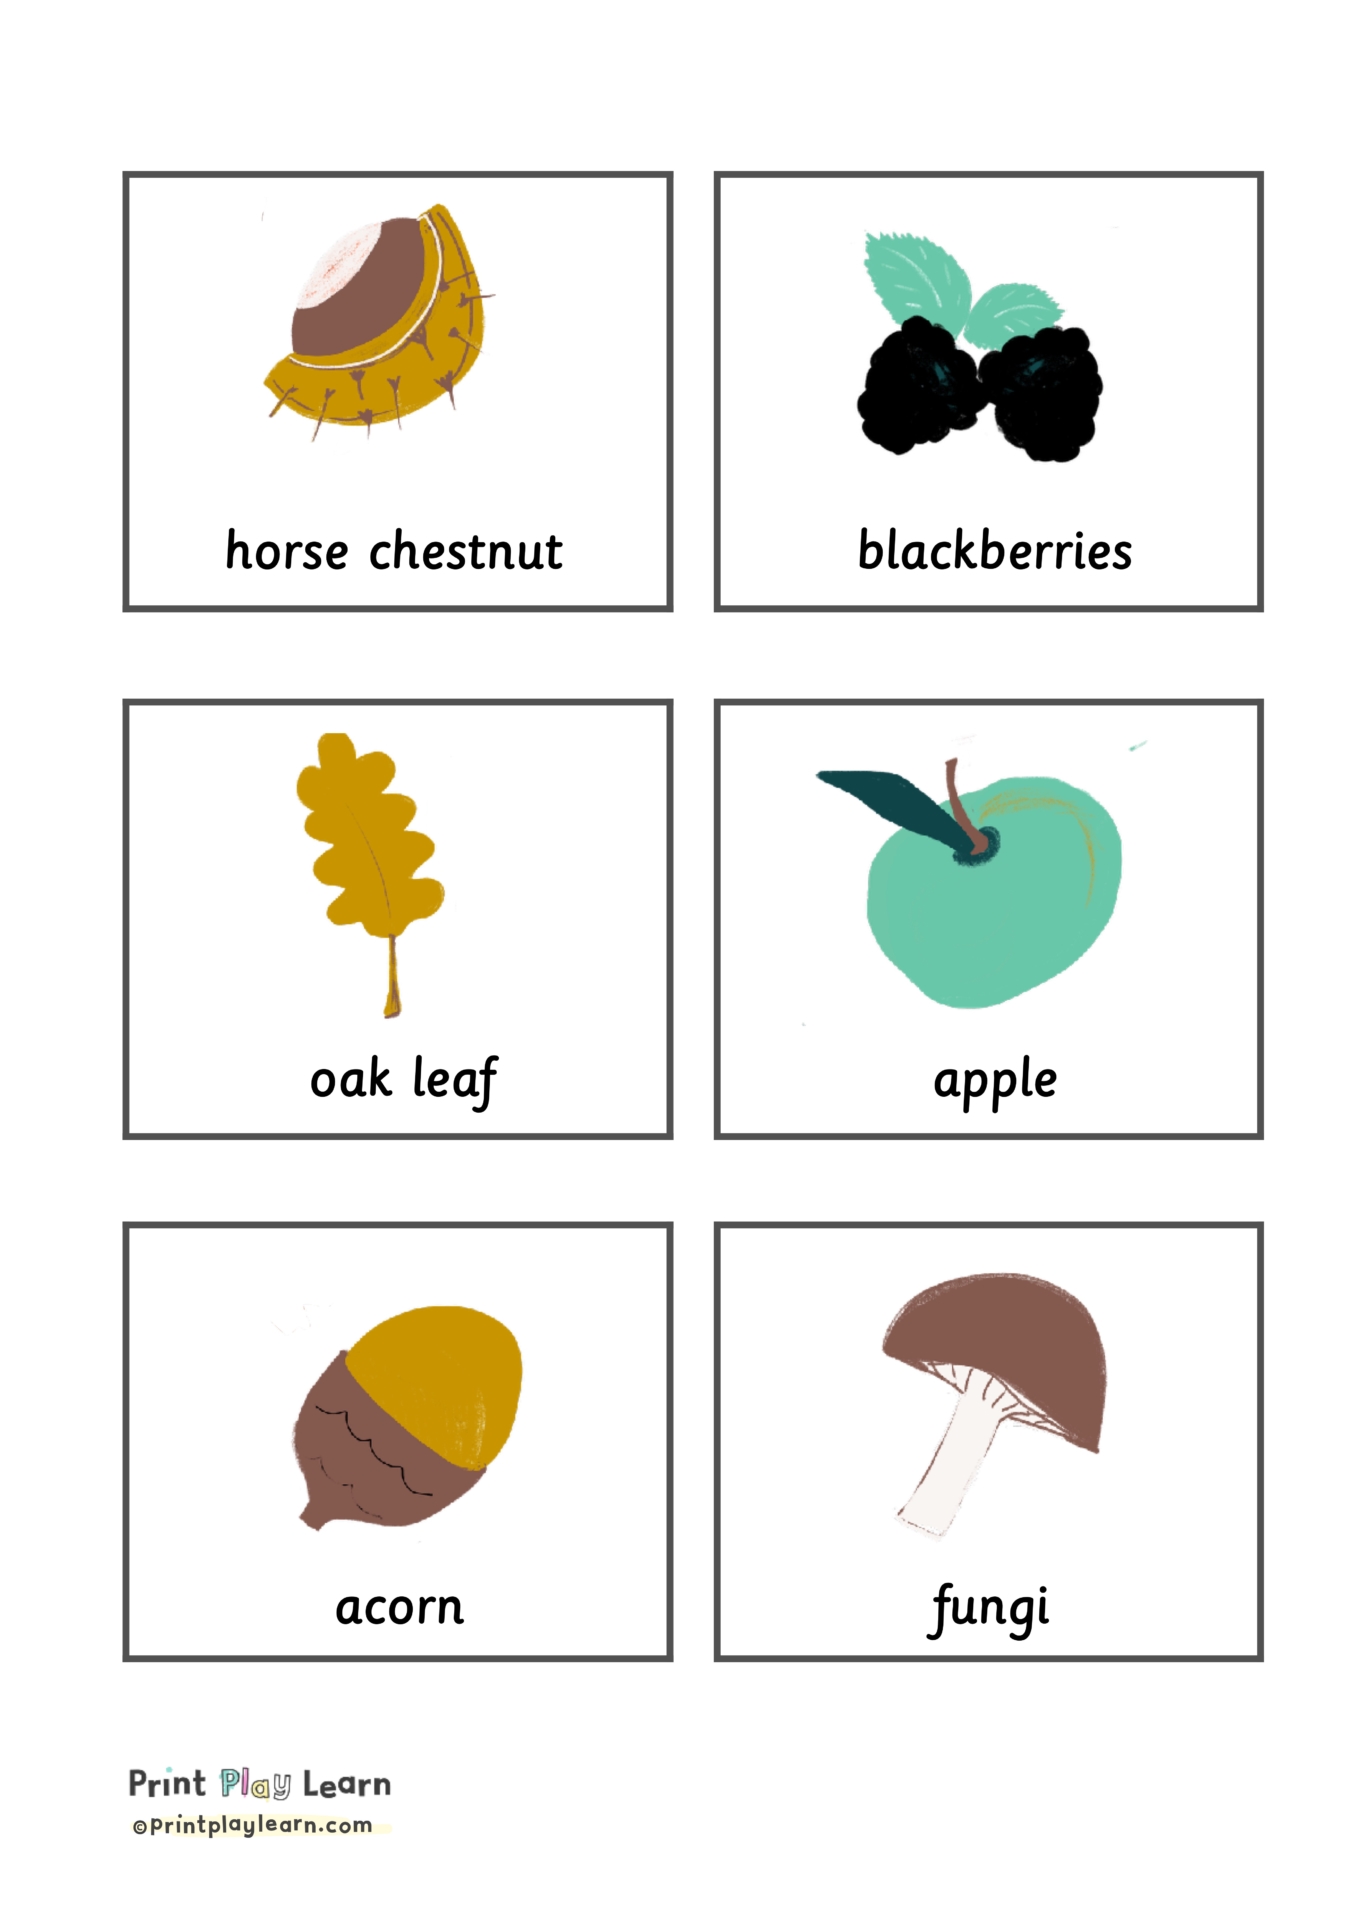 Signs of Autumn flashcards kids (Montessori font) - Printable Teaching  Resources - Print Play Learn